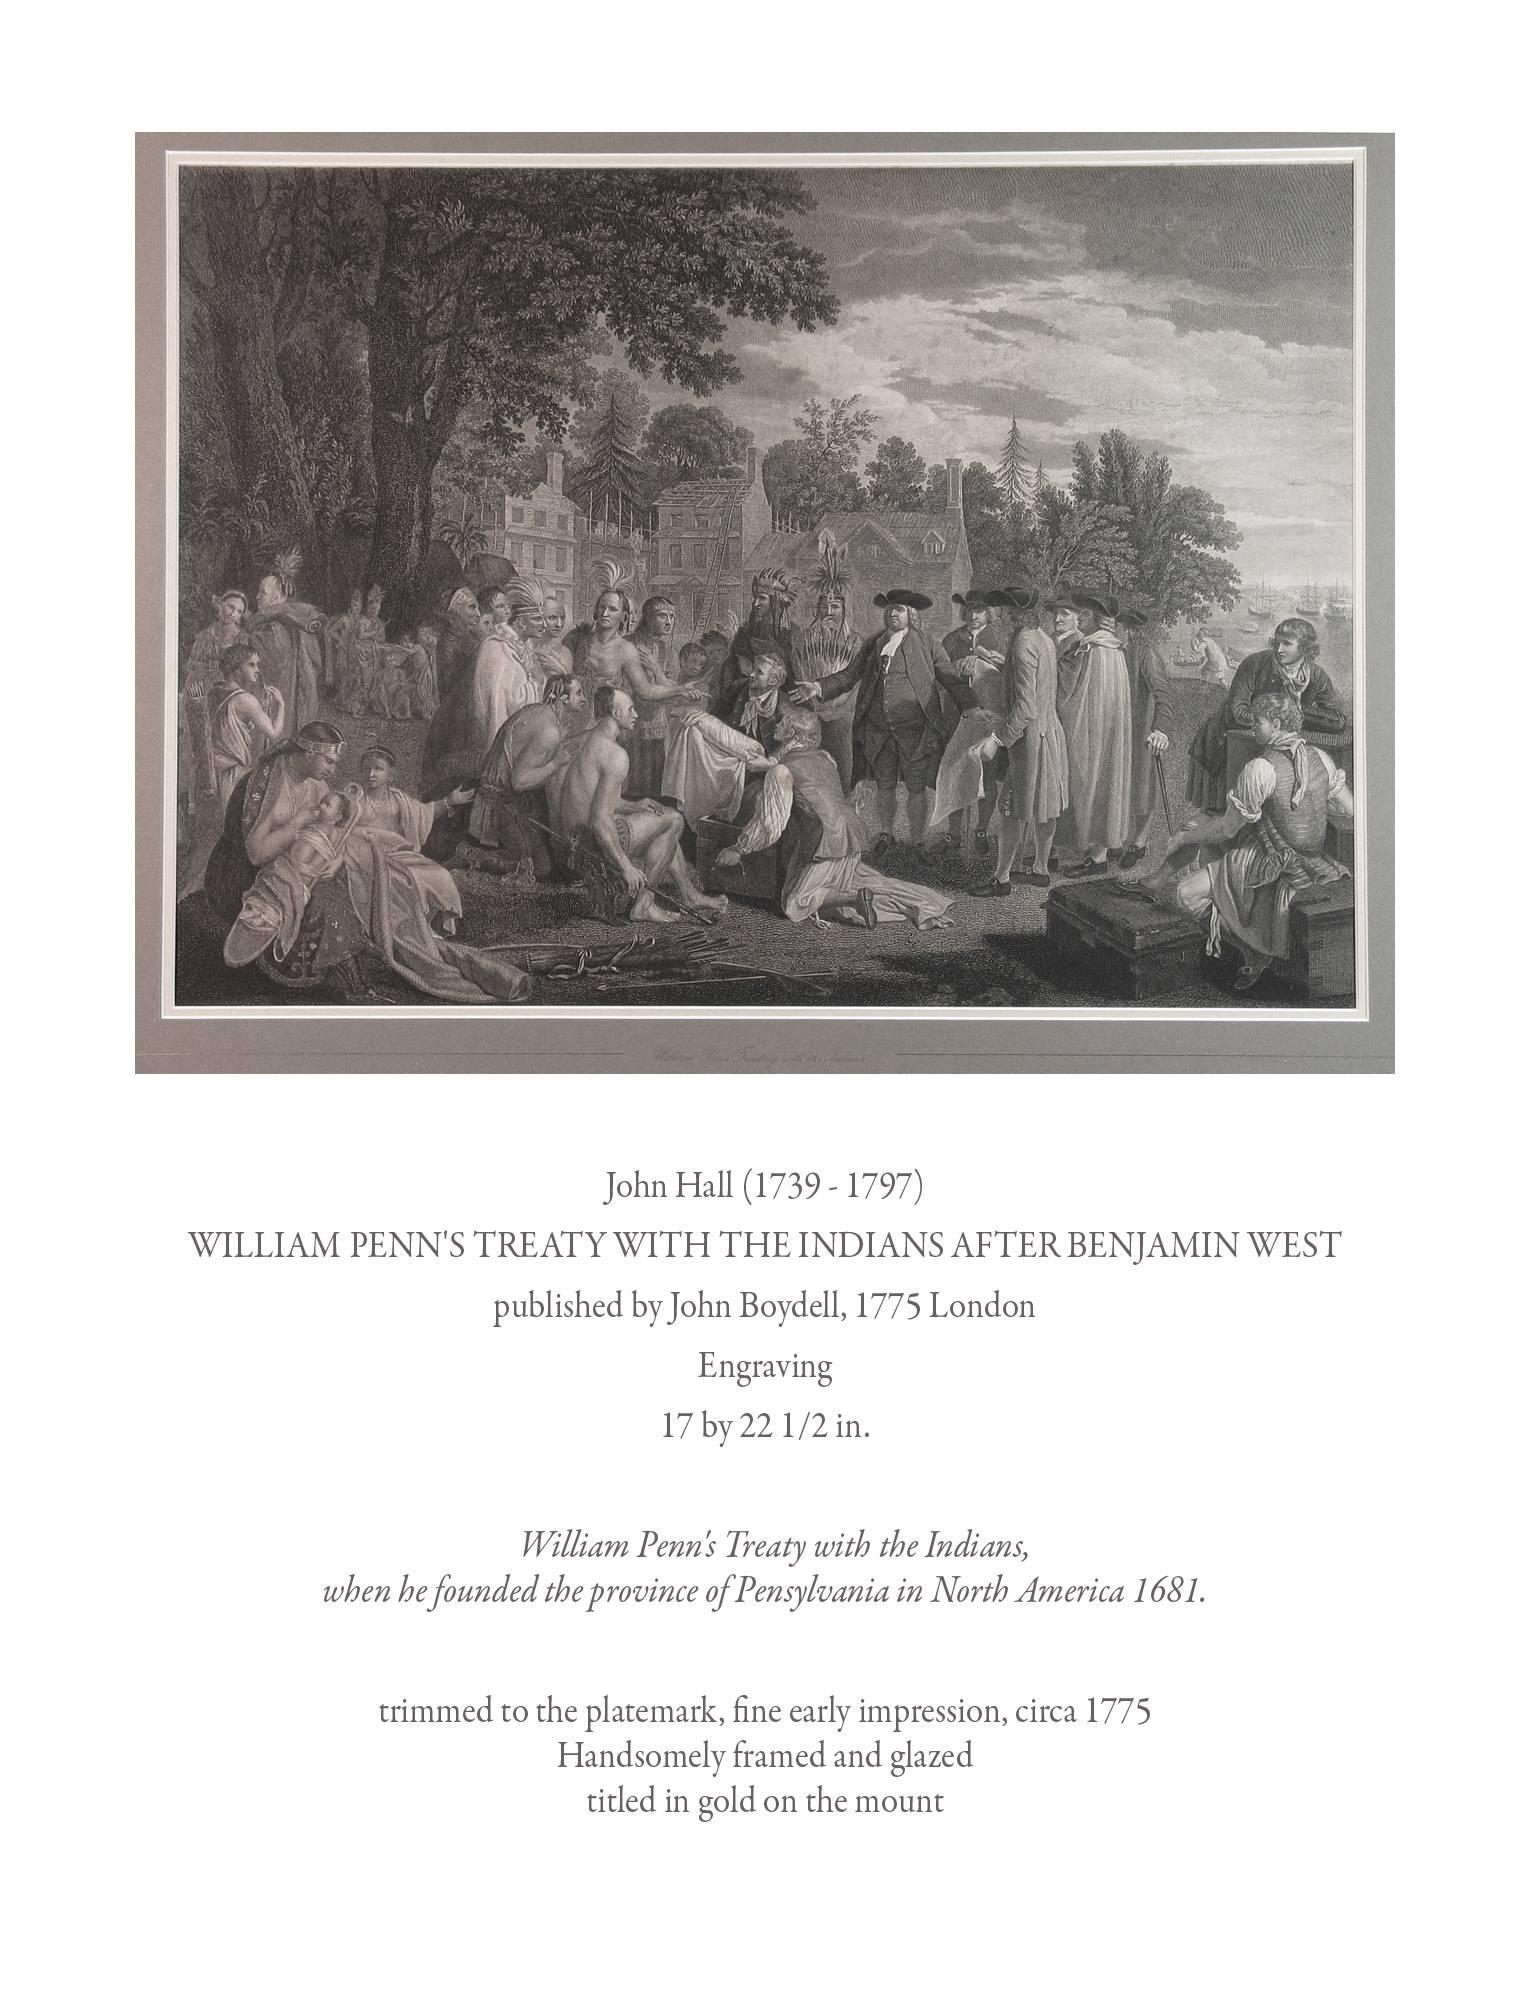 John Hall (1739-1797) William Penn's Treaty With The Indians After Benjamin West, Published by John Boydell, 1775 London, Engraving 17"-inches x 22 1/2"-inches. William Penn's Treaty with the Indians, when he founded the province of